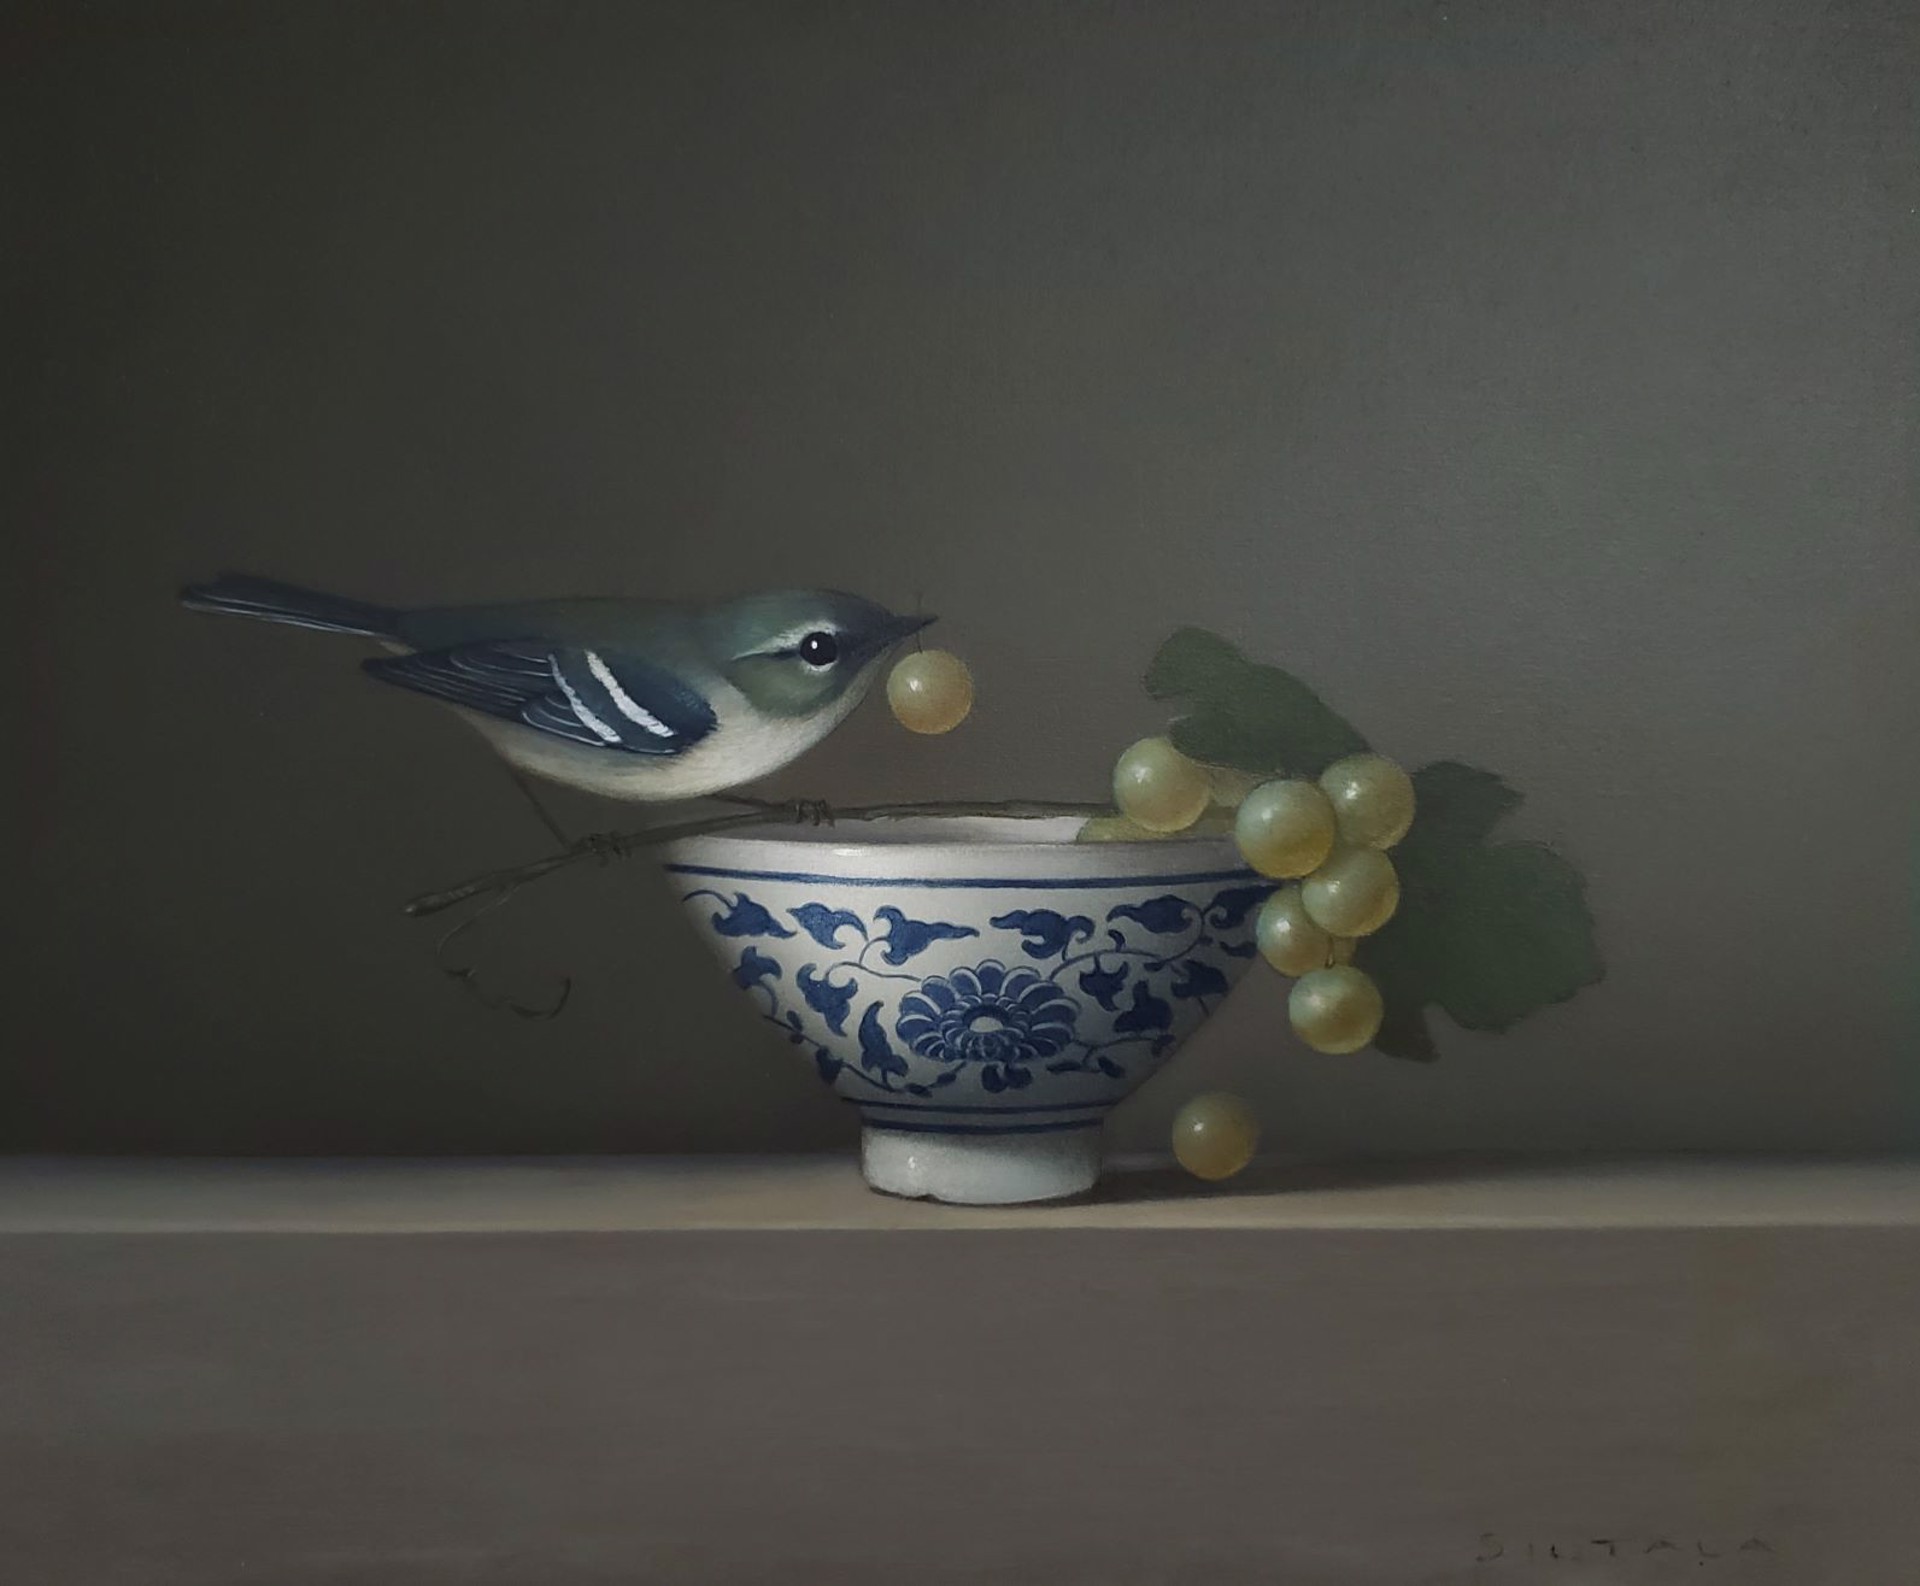 Still life with Cerulean Warbler by Sarah Siltala